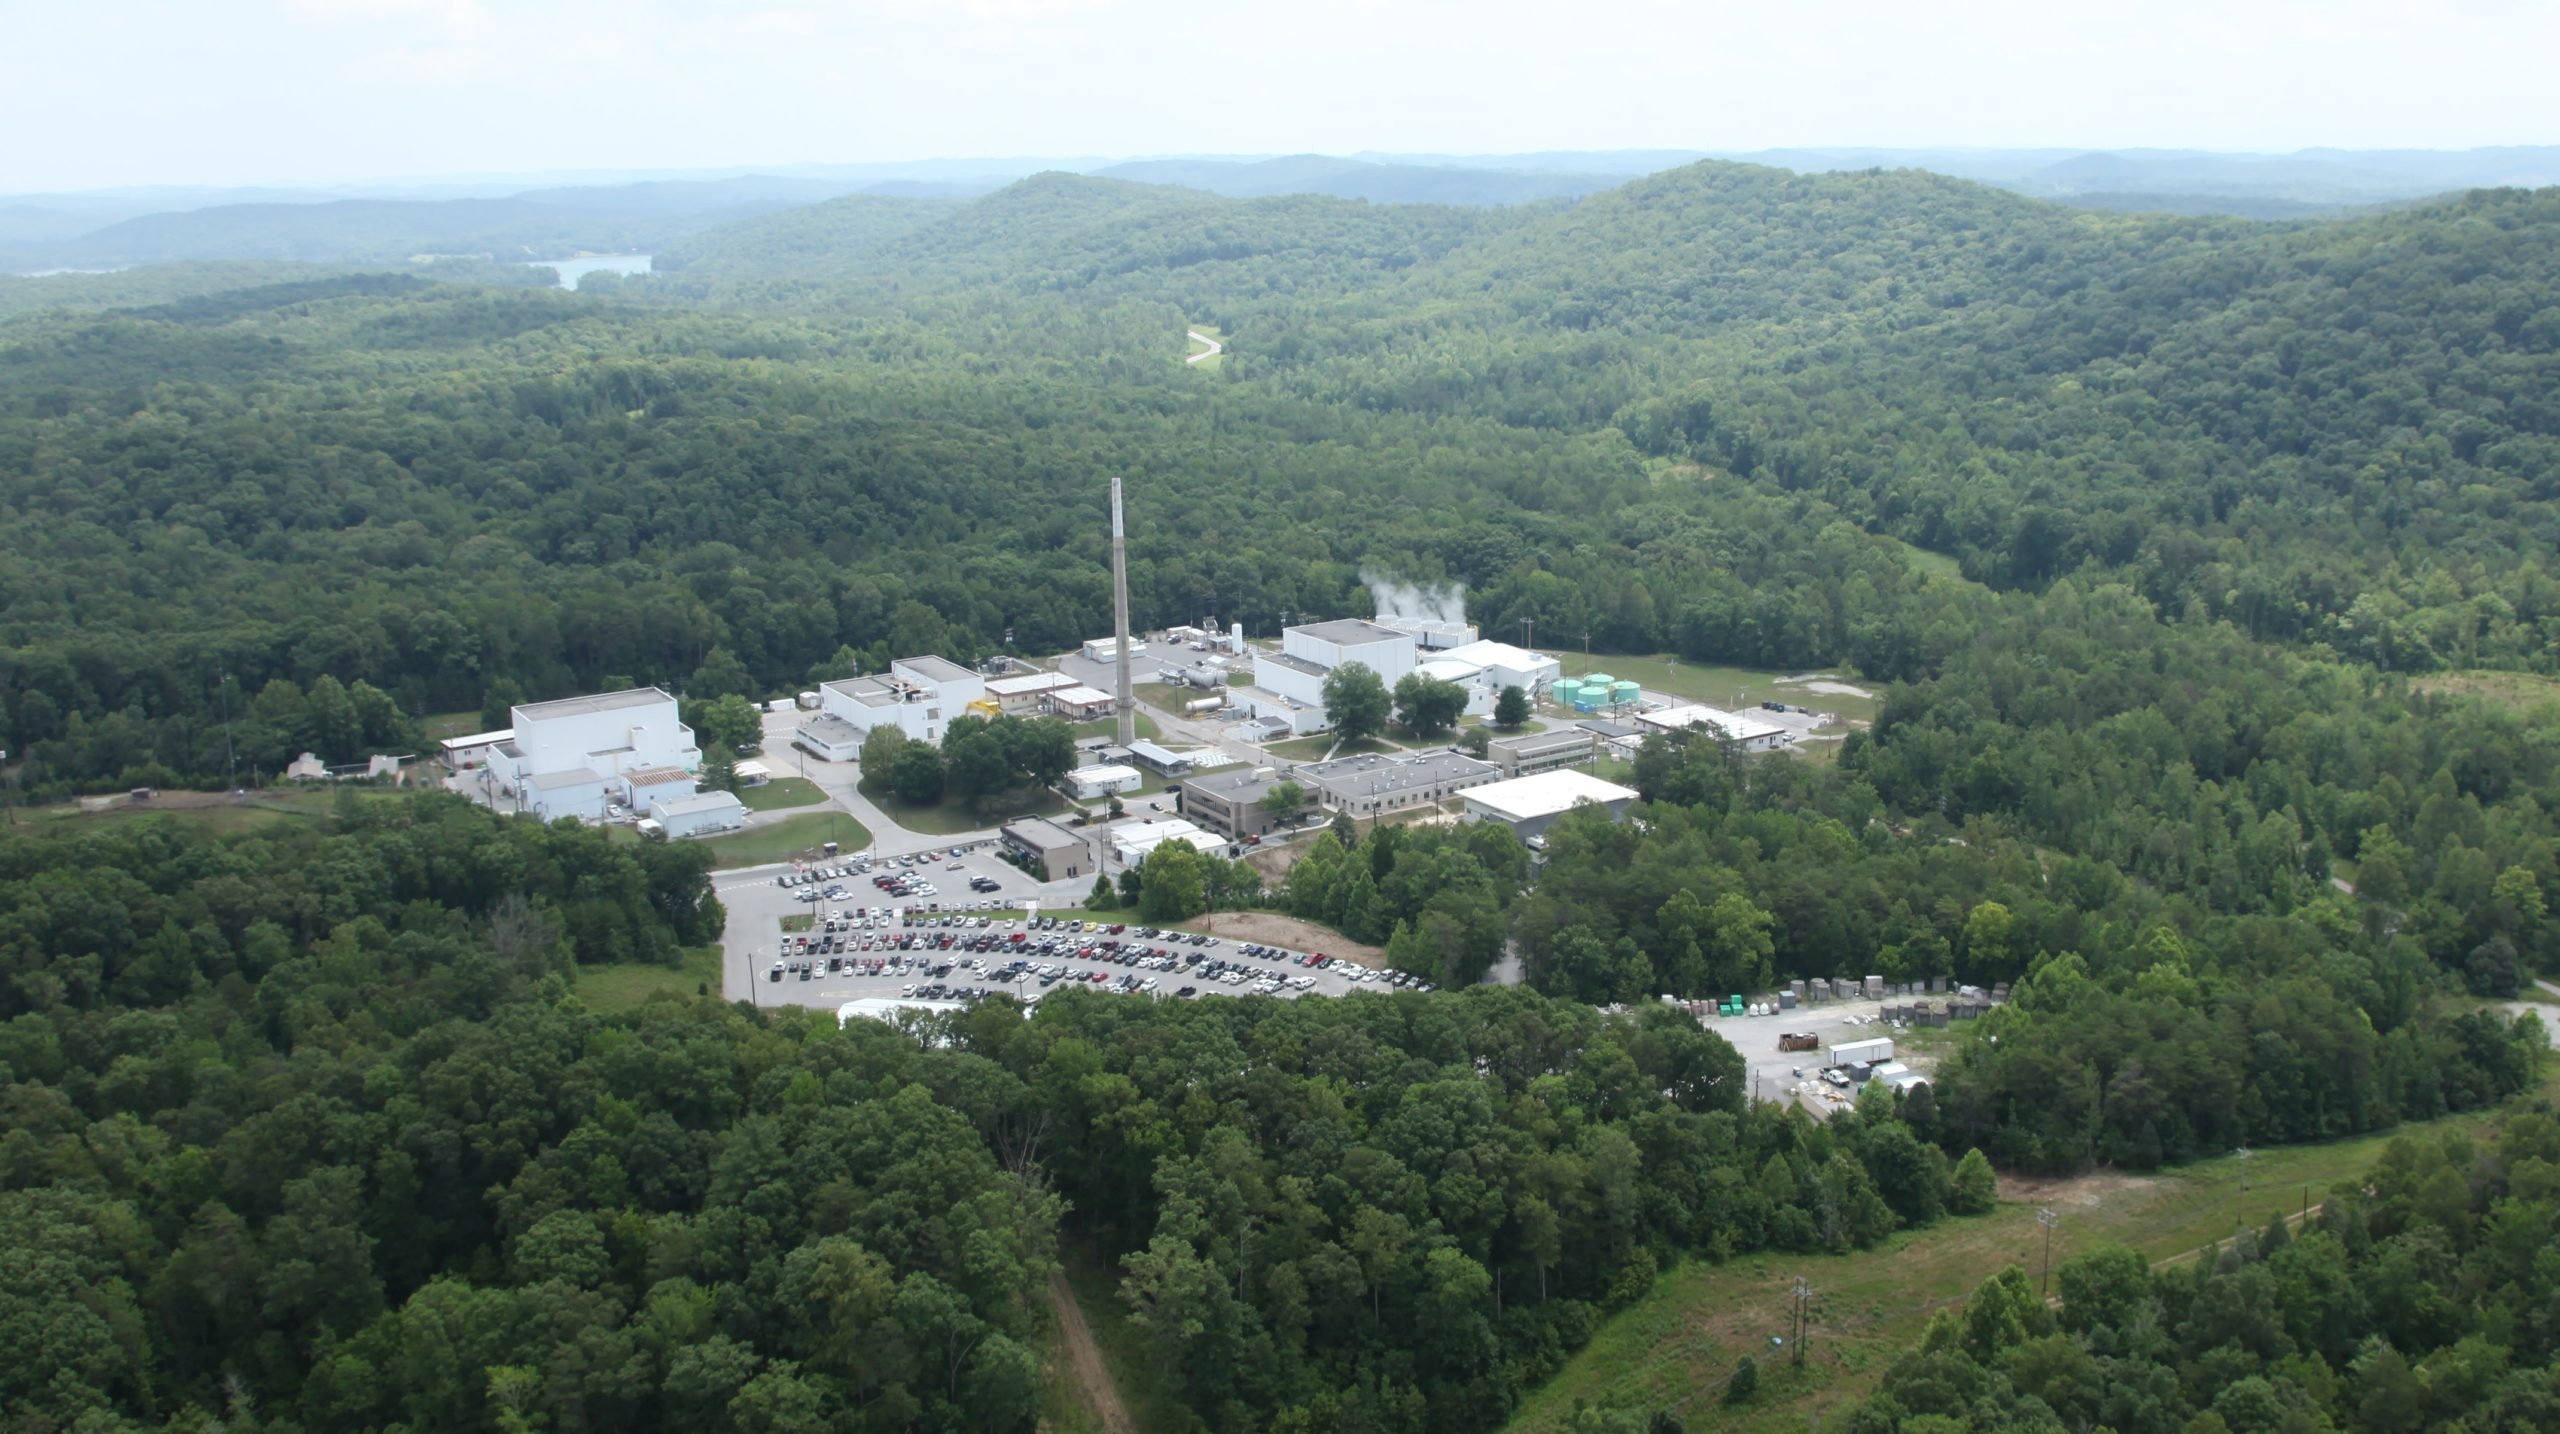 The High Flux Isotope Reactor in Oak Ridge, Tennessee. (Image: Wikimedia Commons, Fair Use)